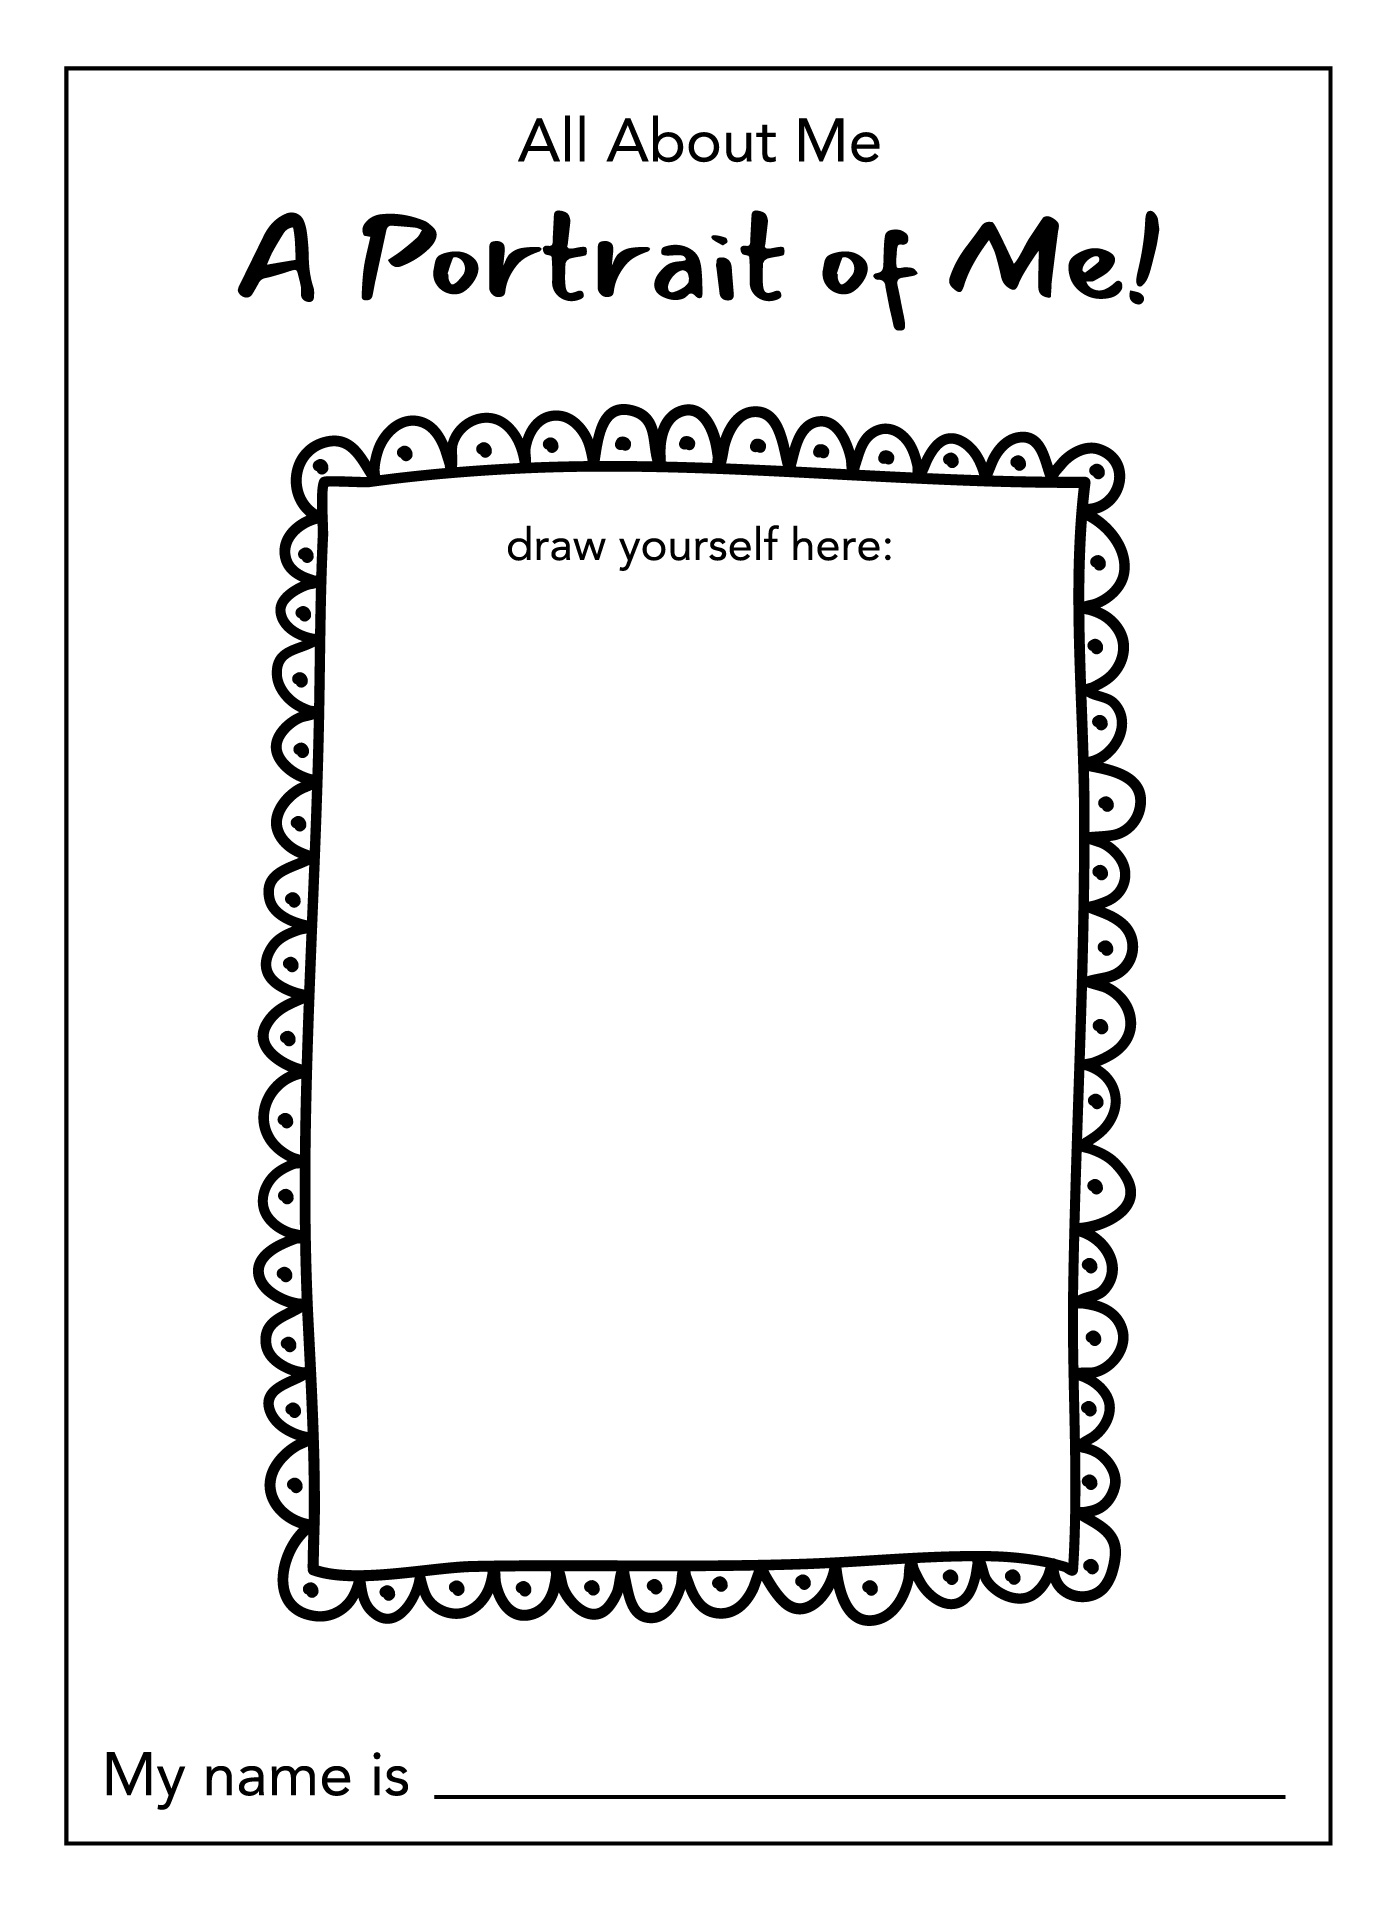 All About Me Book and Worksheet